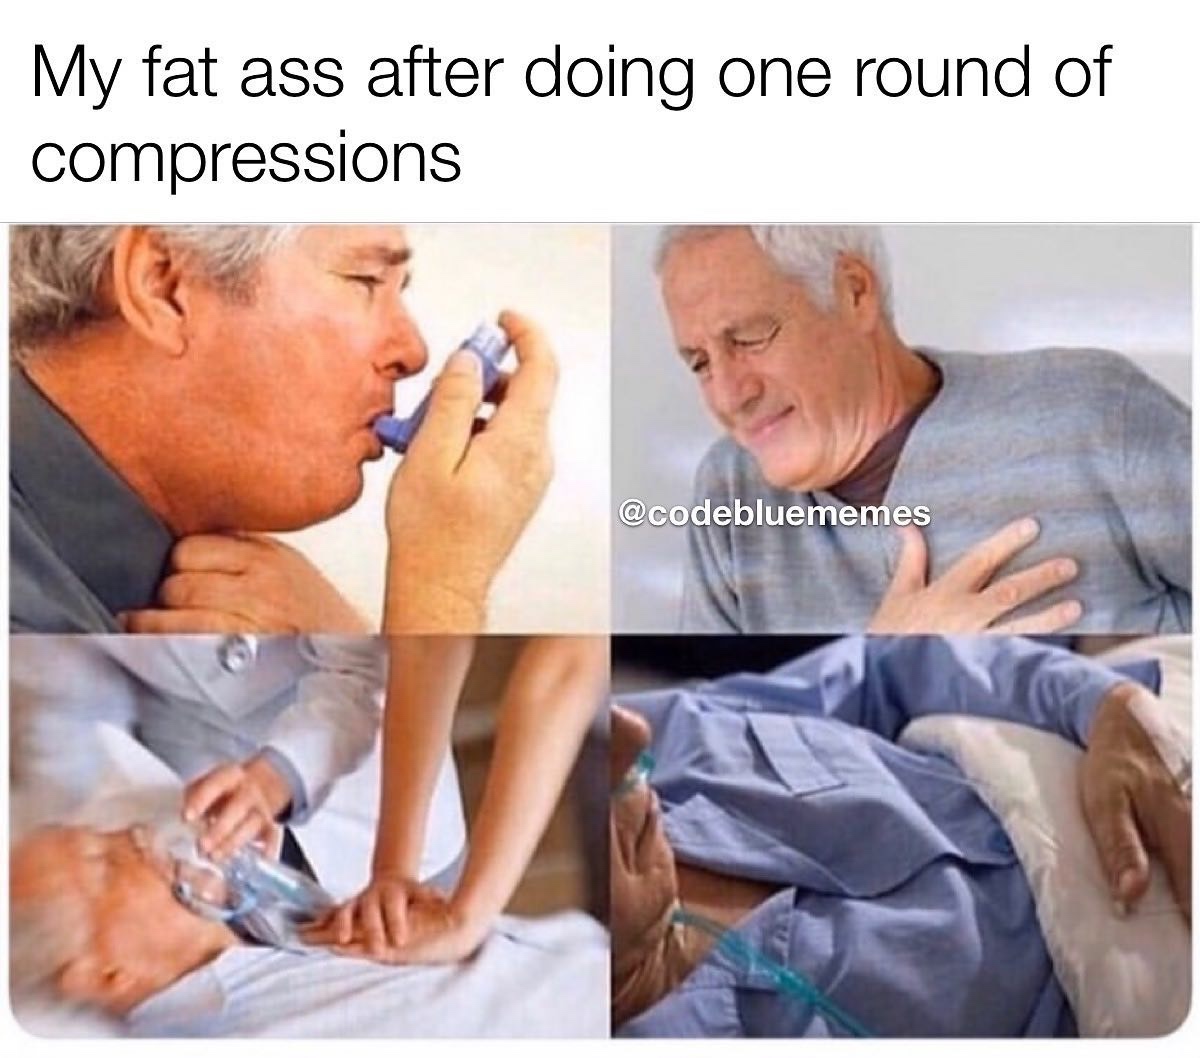 have to admit i was wrong - My fat ass after doing one round of compressions